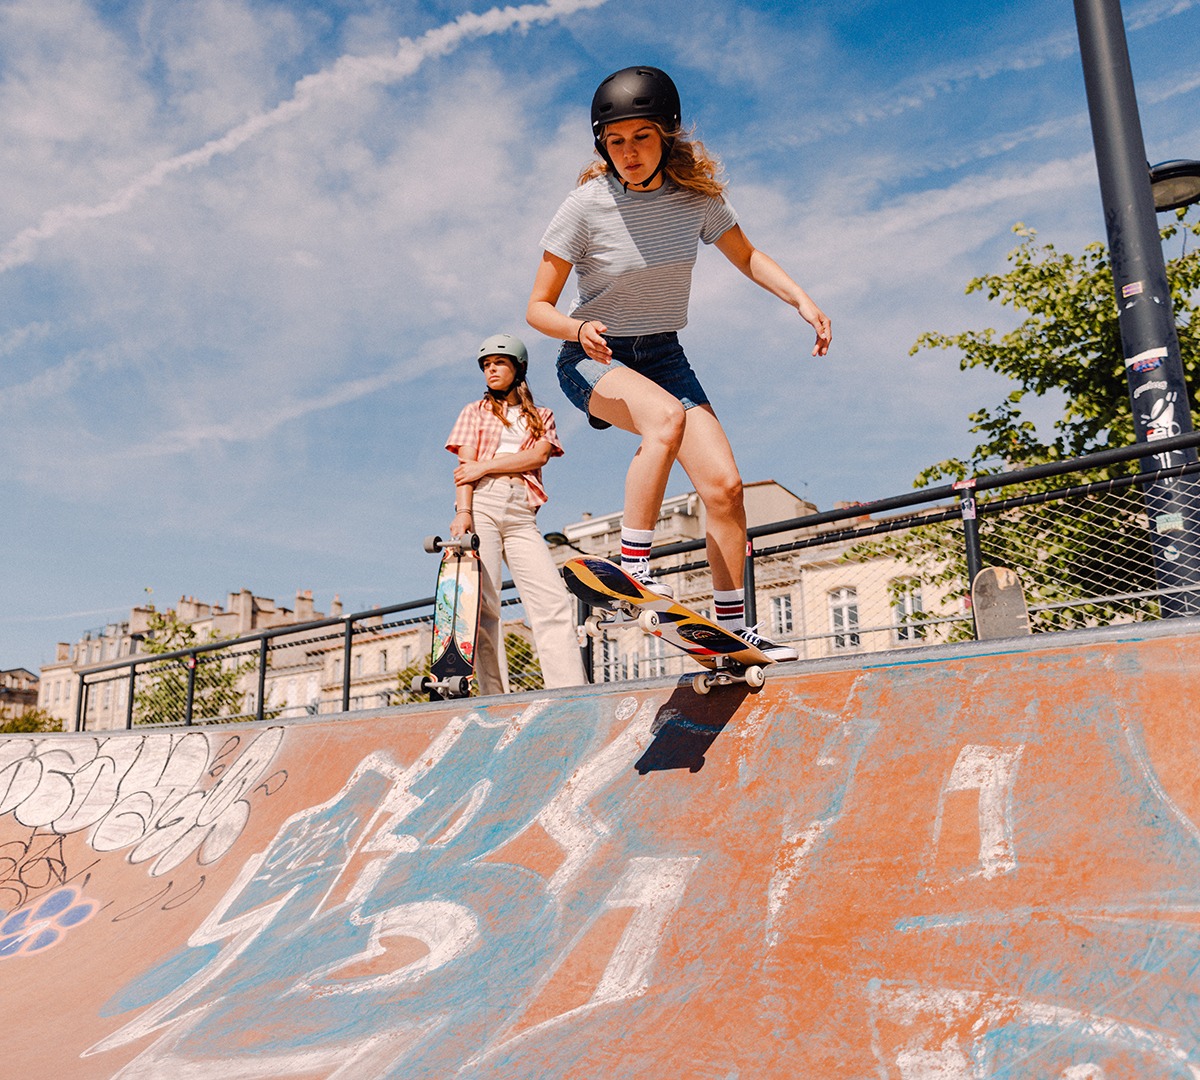 Skateboarding-Scooter-Top-Rated-Skates-and-Scooters-for-all-Ages-and-Skill-Levels-at-Decathlon